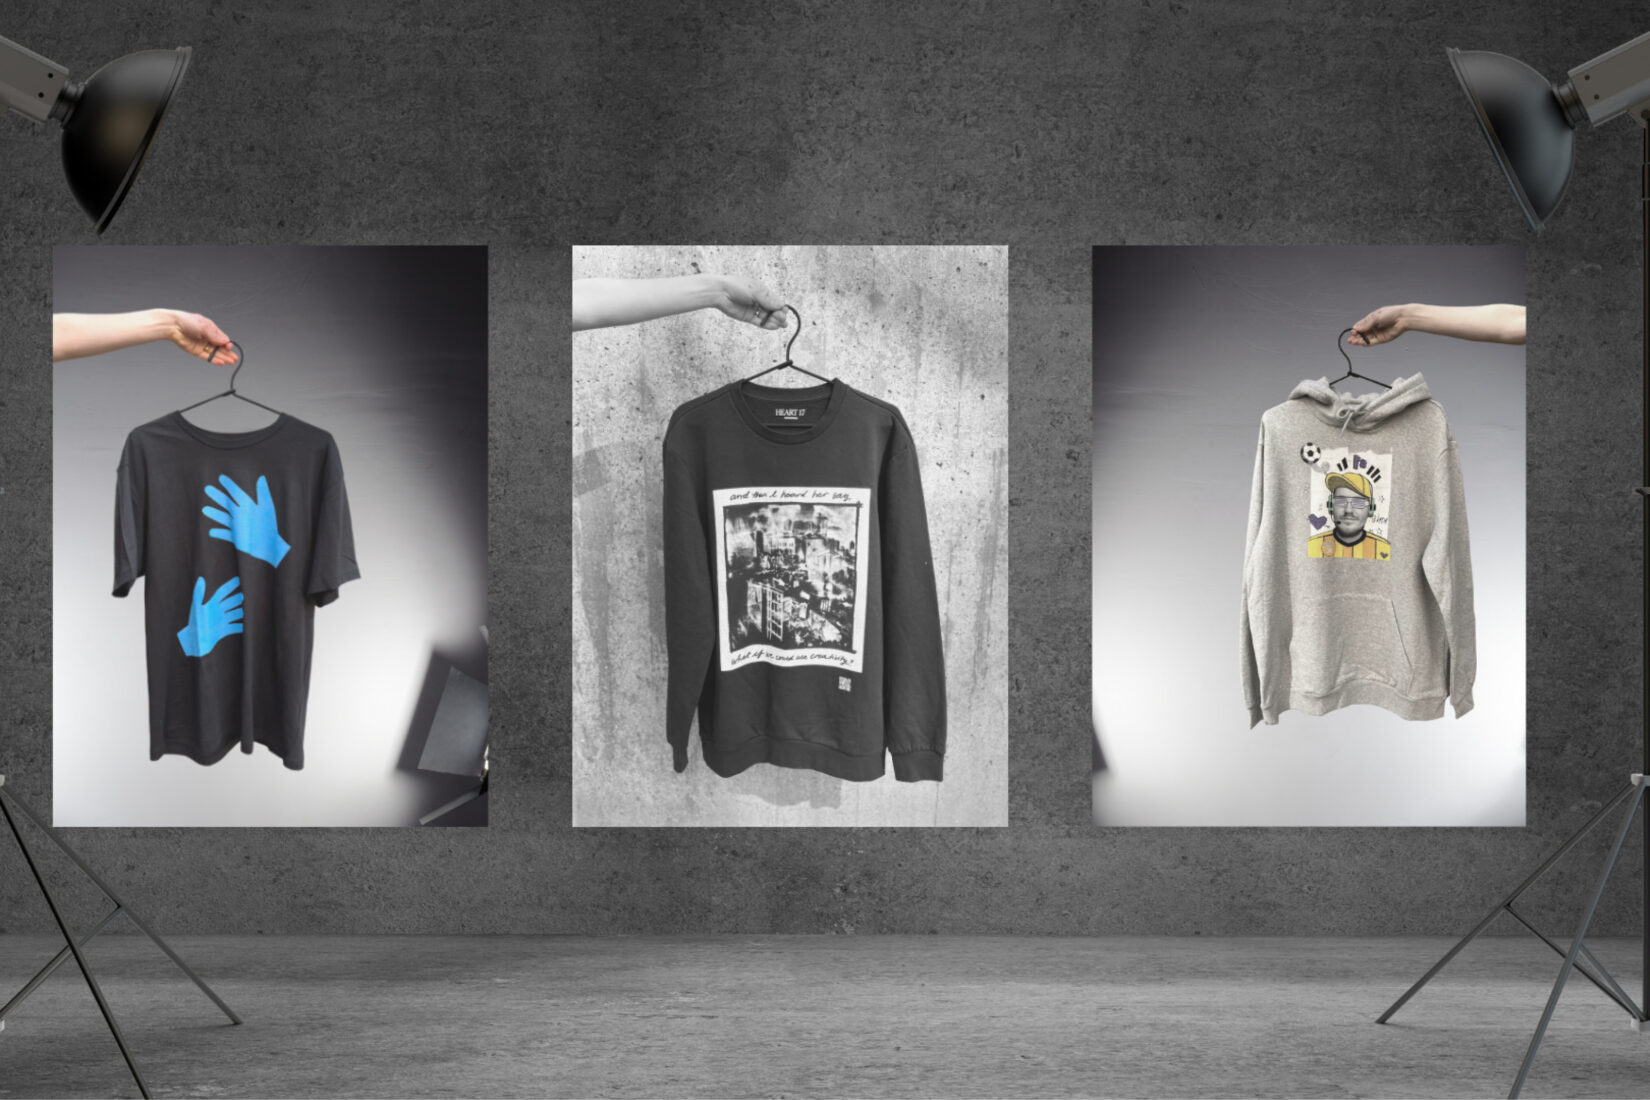 Photo of two sweat shirts and a t-shirt bearing printed illustrations and shown in the spotlight.